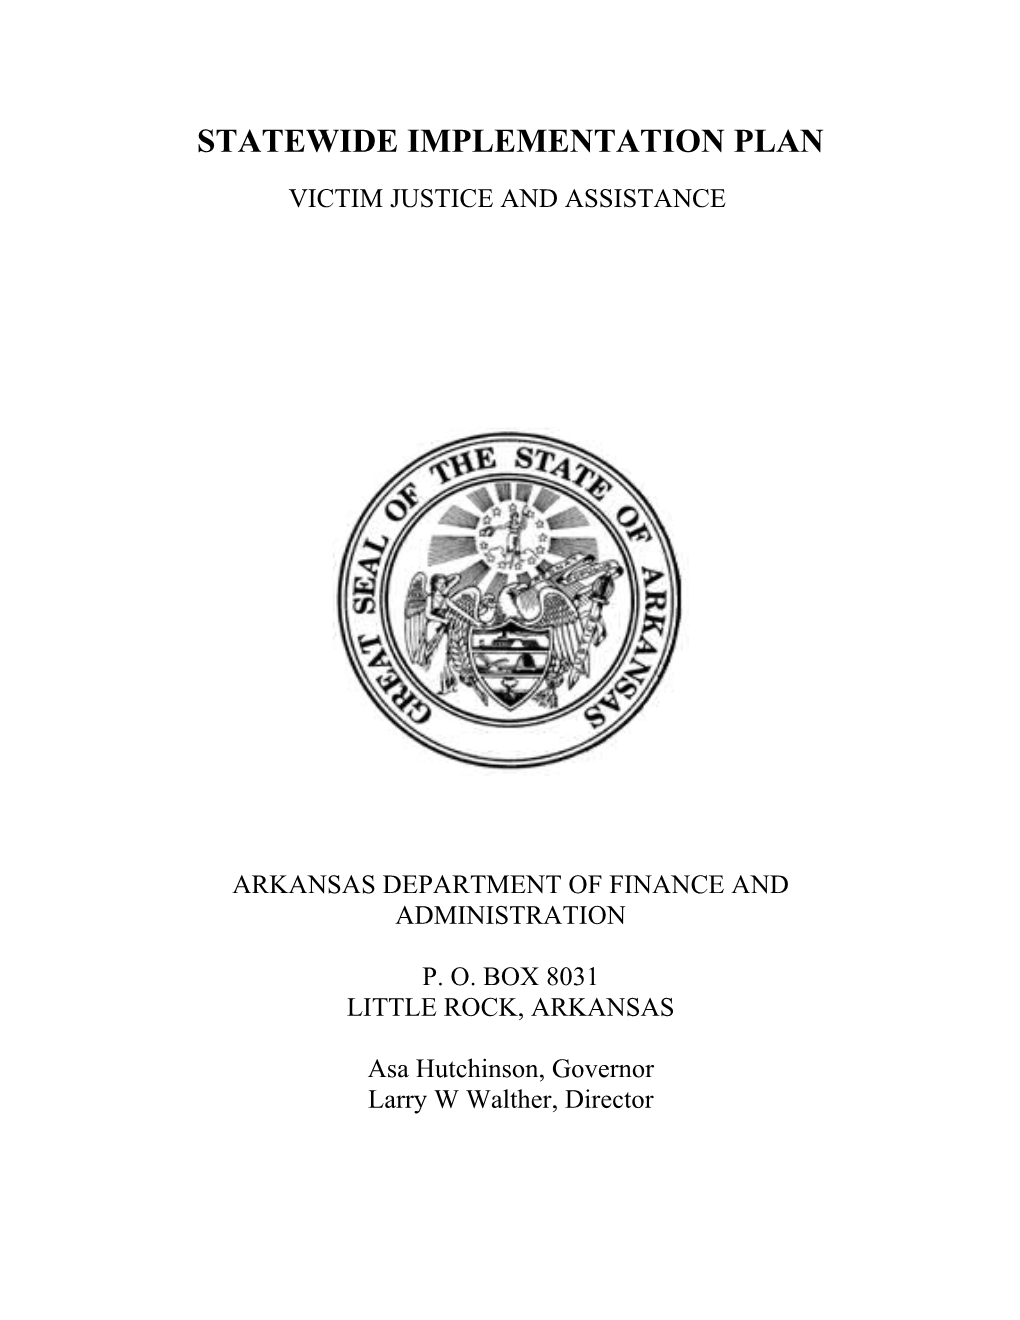 Statewide Implementation Plan Victim Justice and Assistance